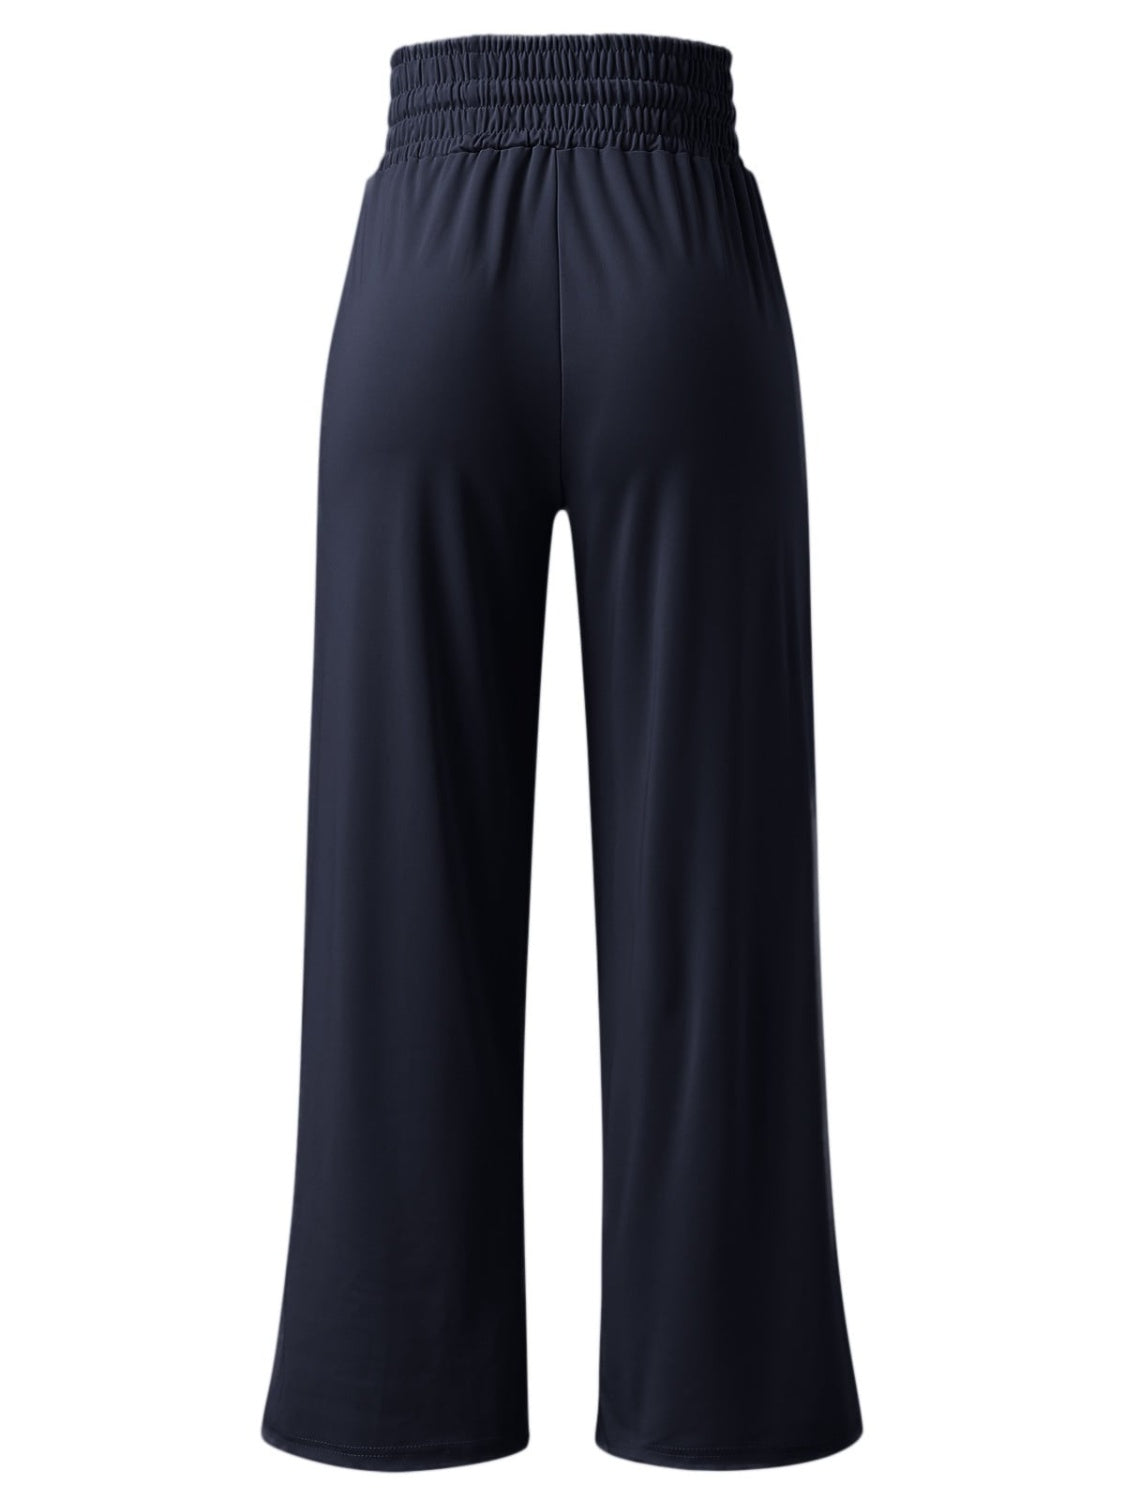 Women's wide-leg pants with an elastic waistband in various colors.